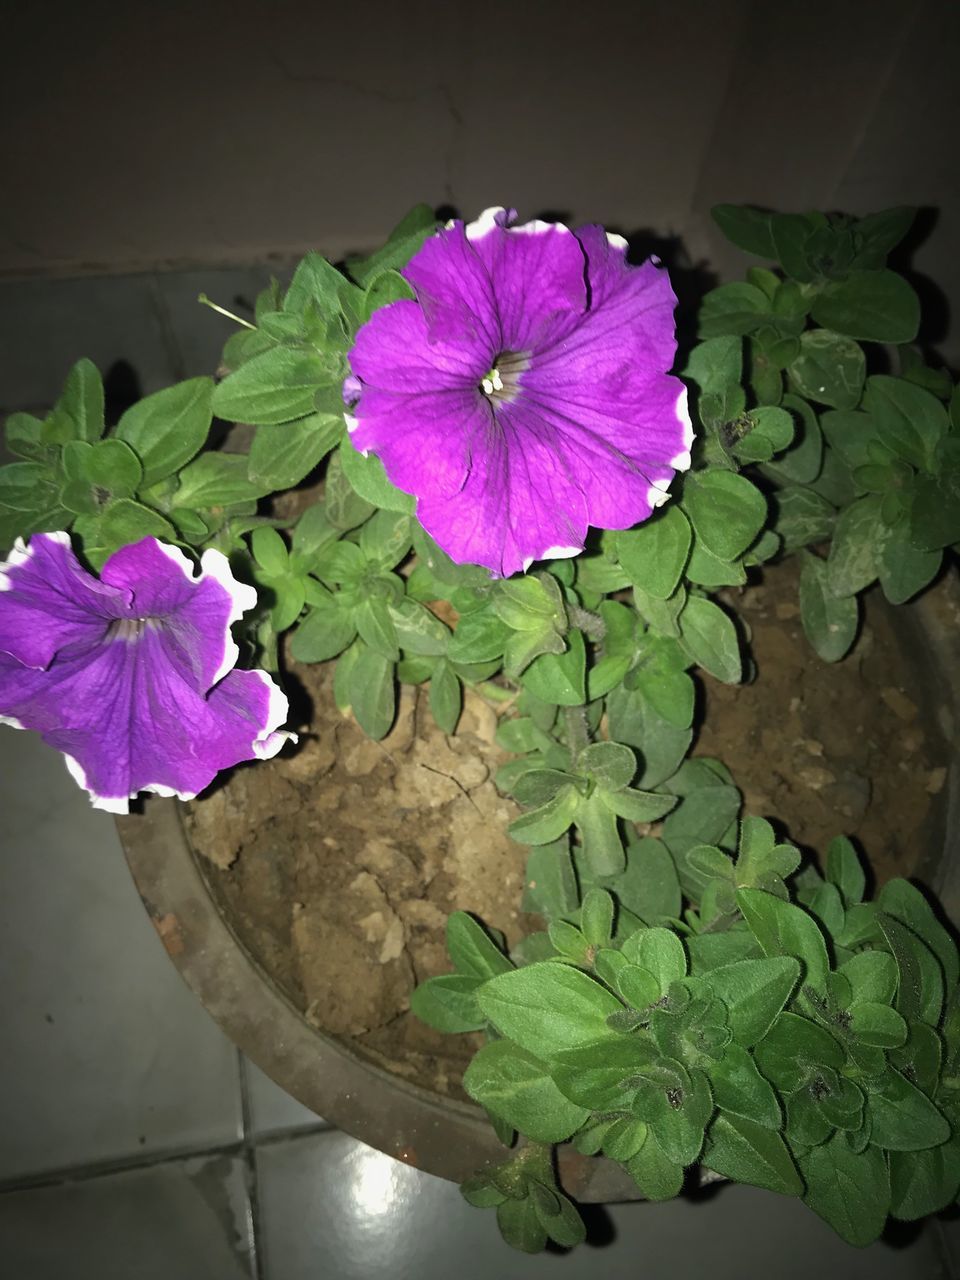 flower, flowering plant, plant, freshness, vulnerability, fragility, petal, beauty in nature, inflorescence, flower head, close-up, plant part, leaf, growth, nature, potted plant, no people, pink color, green color, purple, flower pot